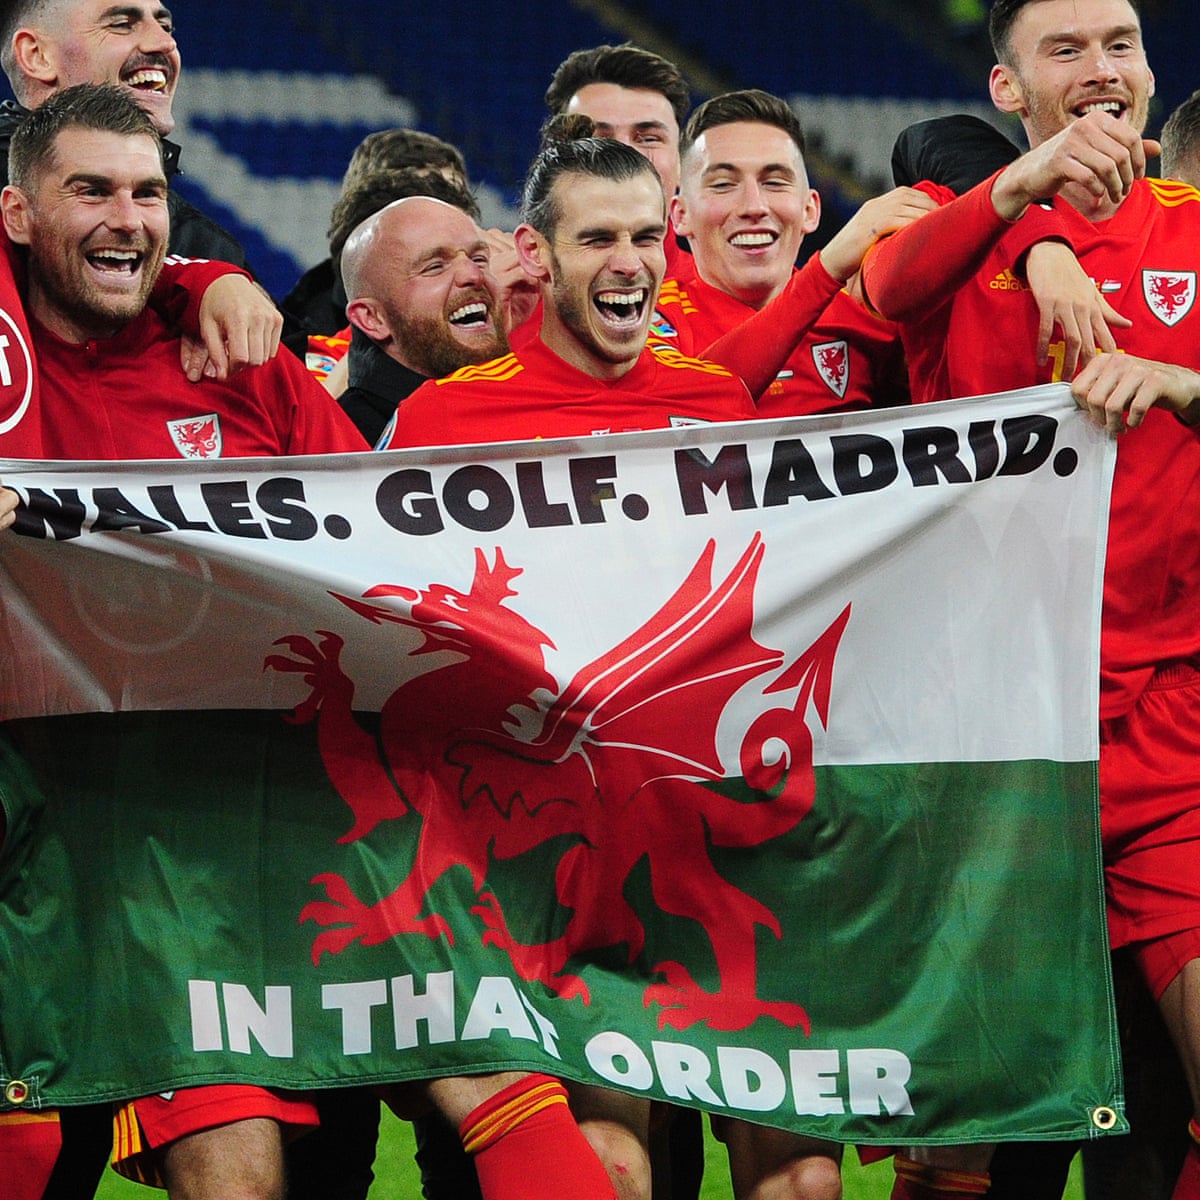 Gareth Bale and that 'Wales, golf, Madrid' flag: Real are not amused |  Gareth Bale | The Guardian